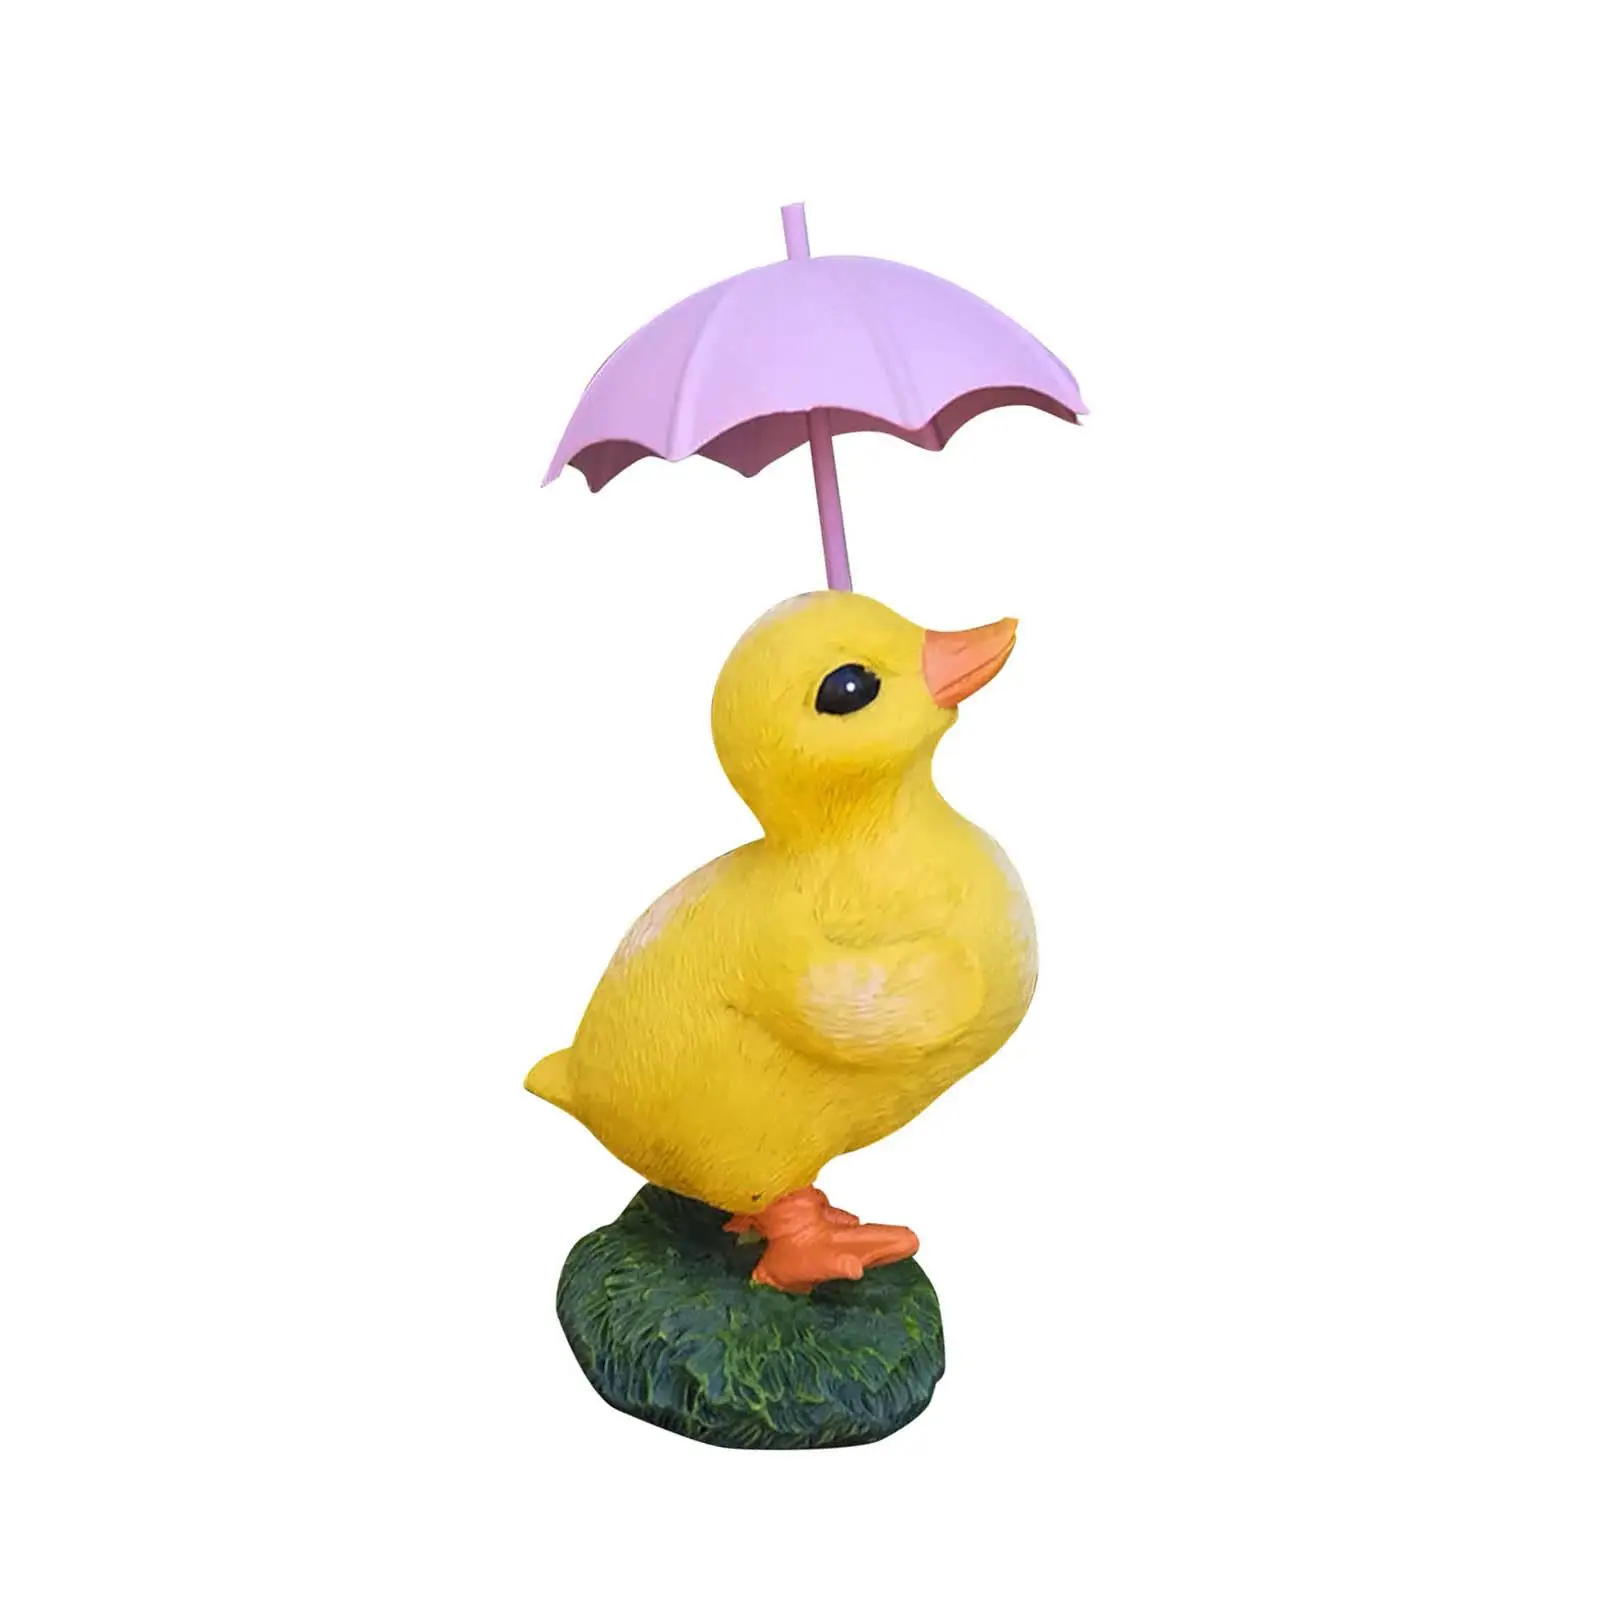 Resin Duck Statue Garden Decor Statues Figurines Outdoor Decor Duck Adornment Ornament for Courtyard Yard Porch Outdoor Outside